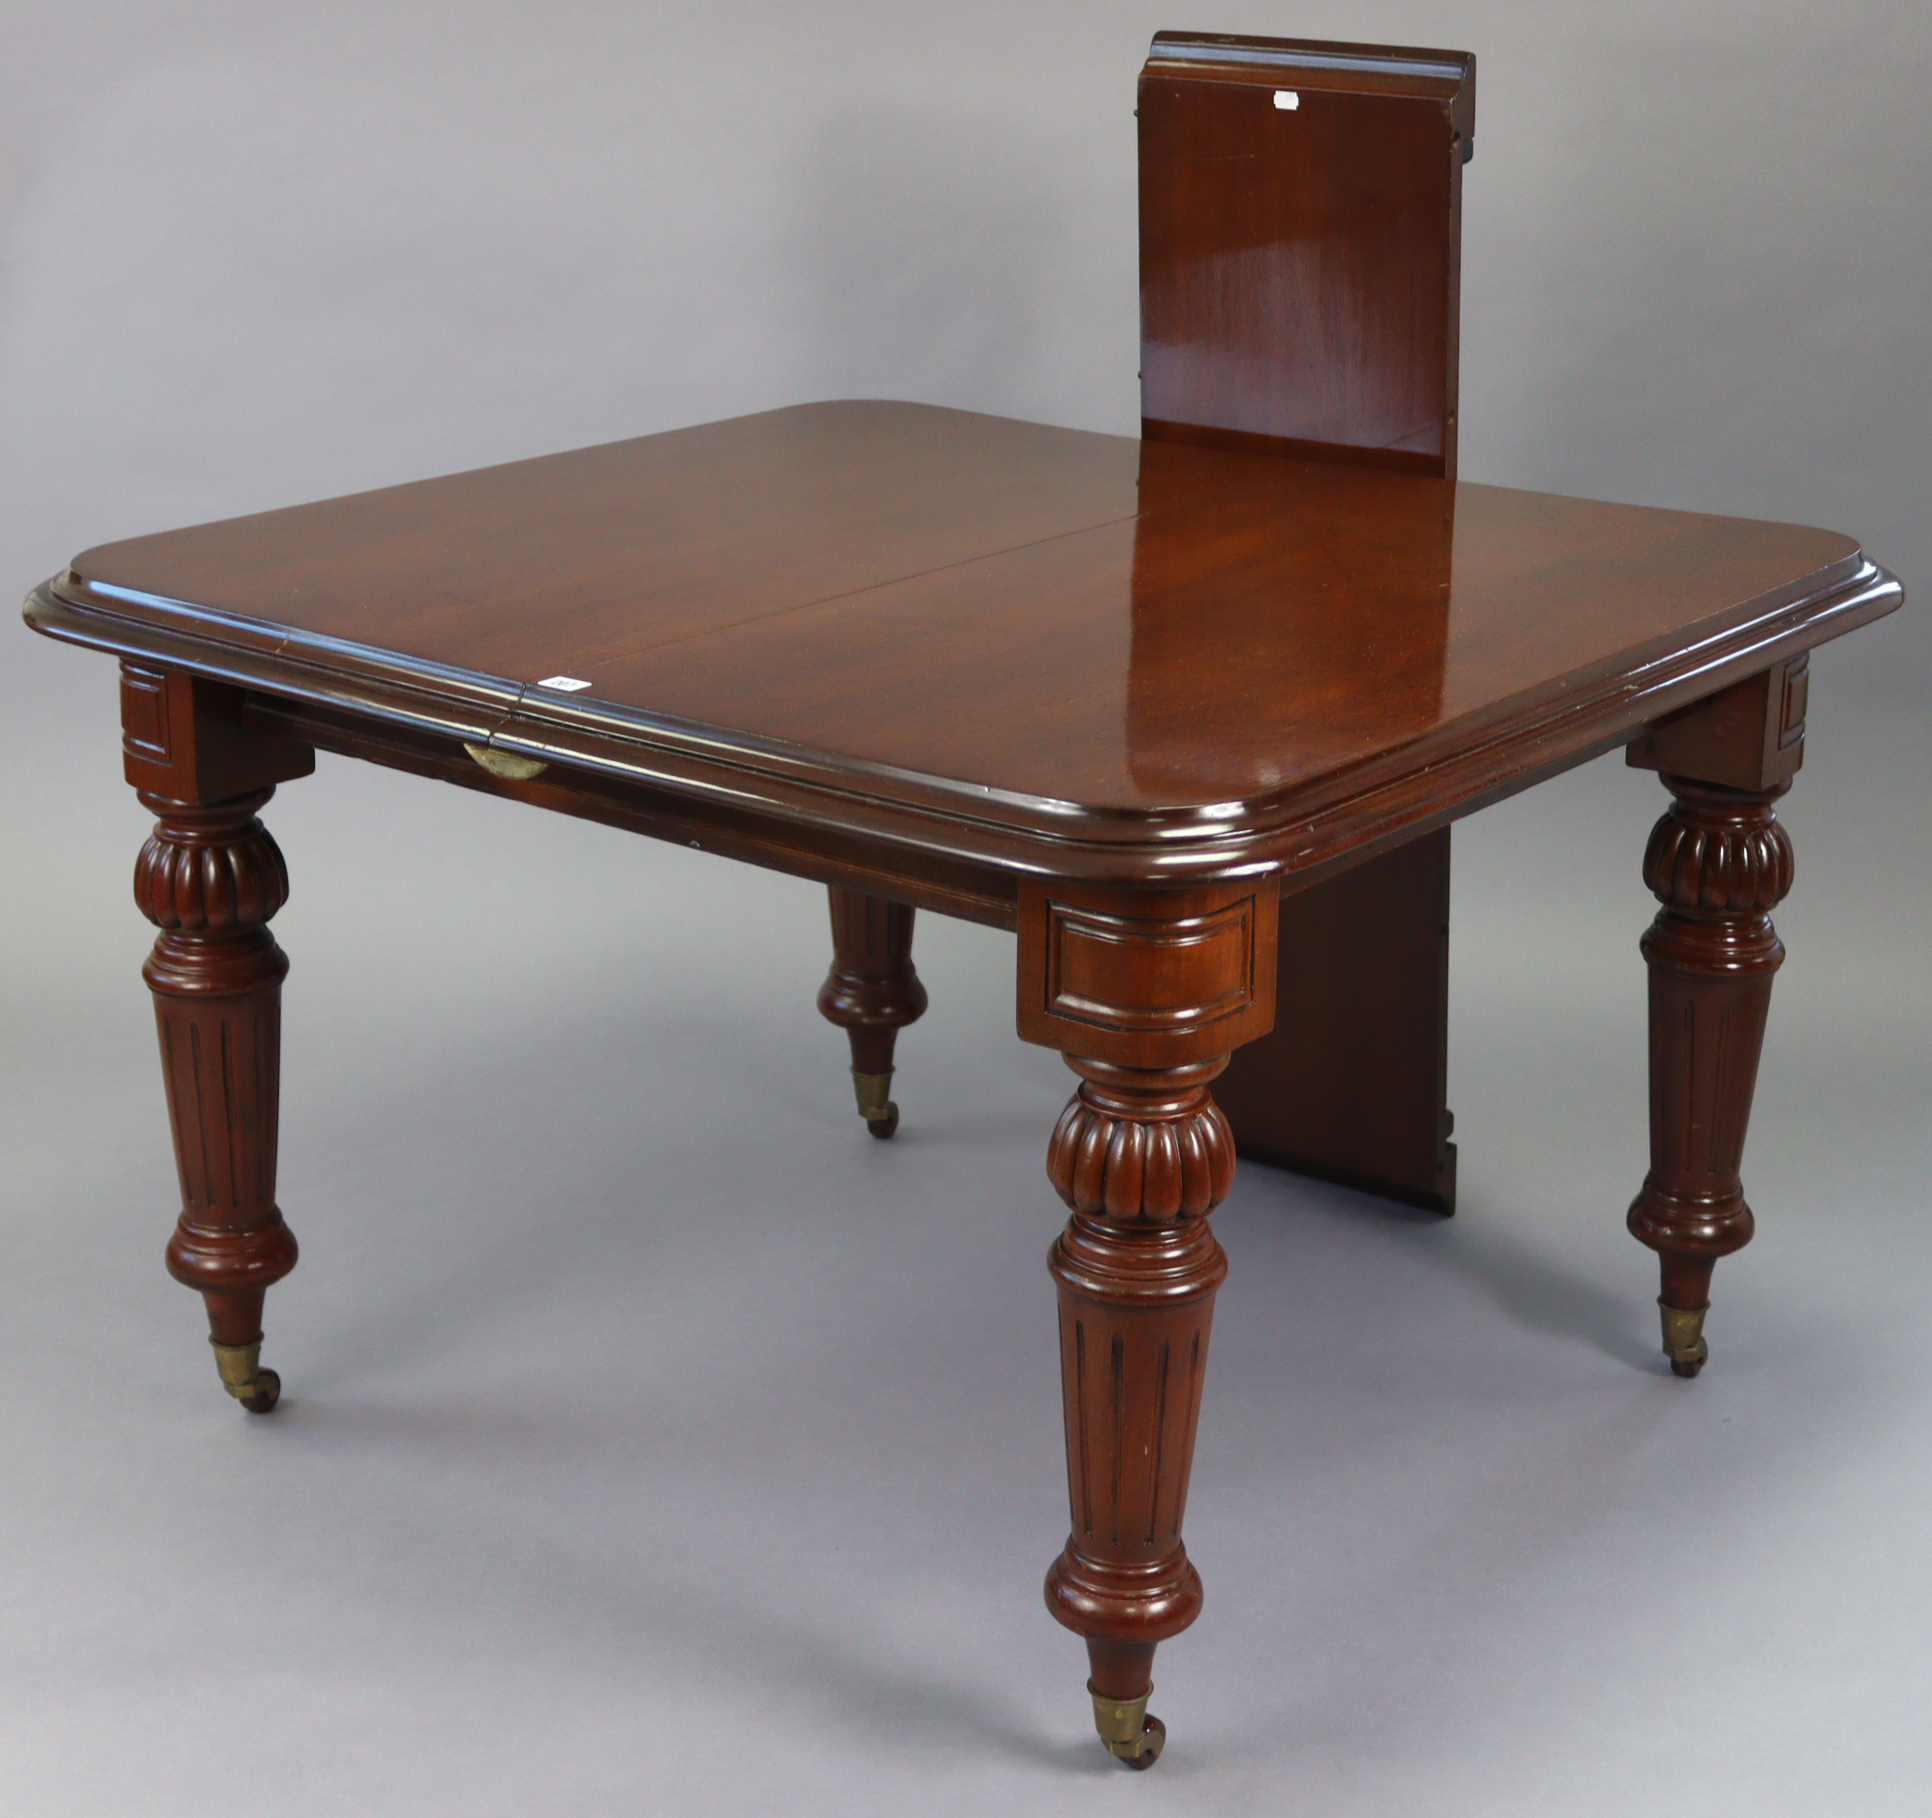 A Victorian-style mahogany extending dining table, with moulded edge & rounded corners to the